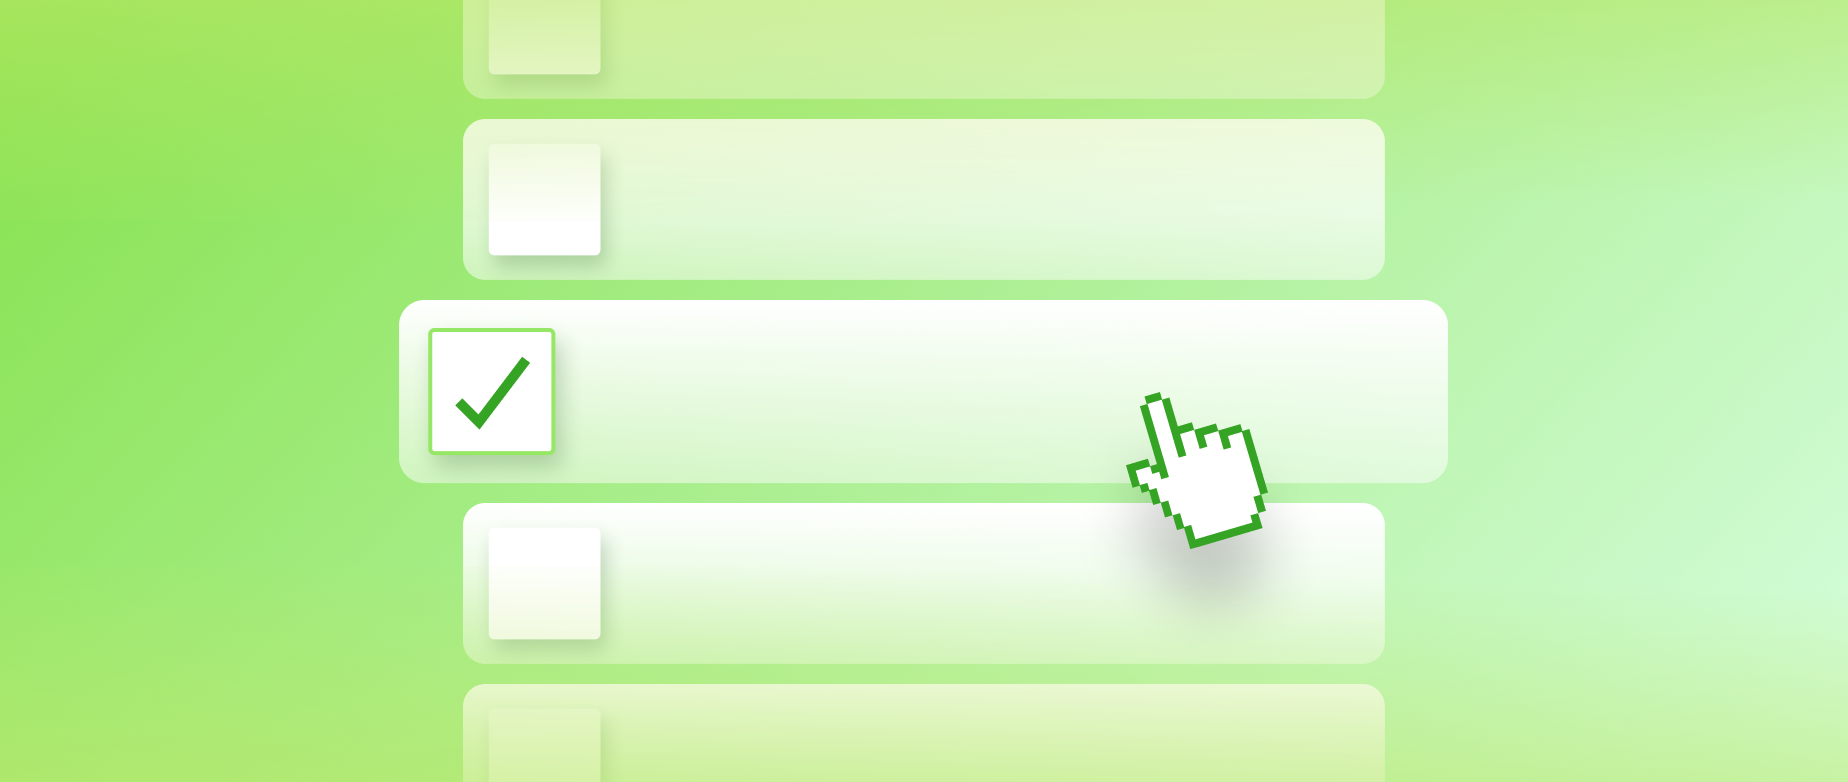 Faceted navigation with a cursor on a green background.